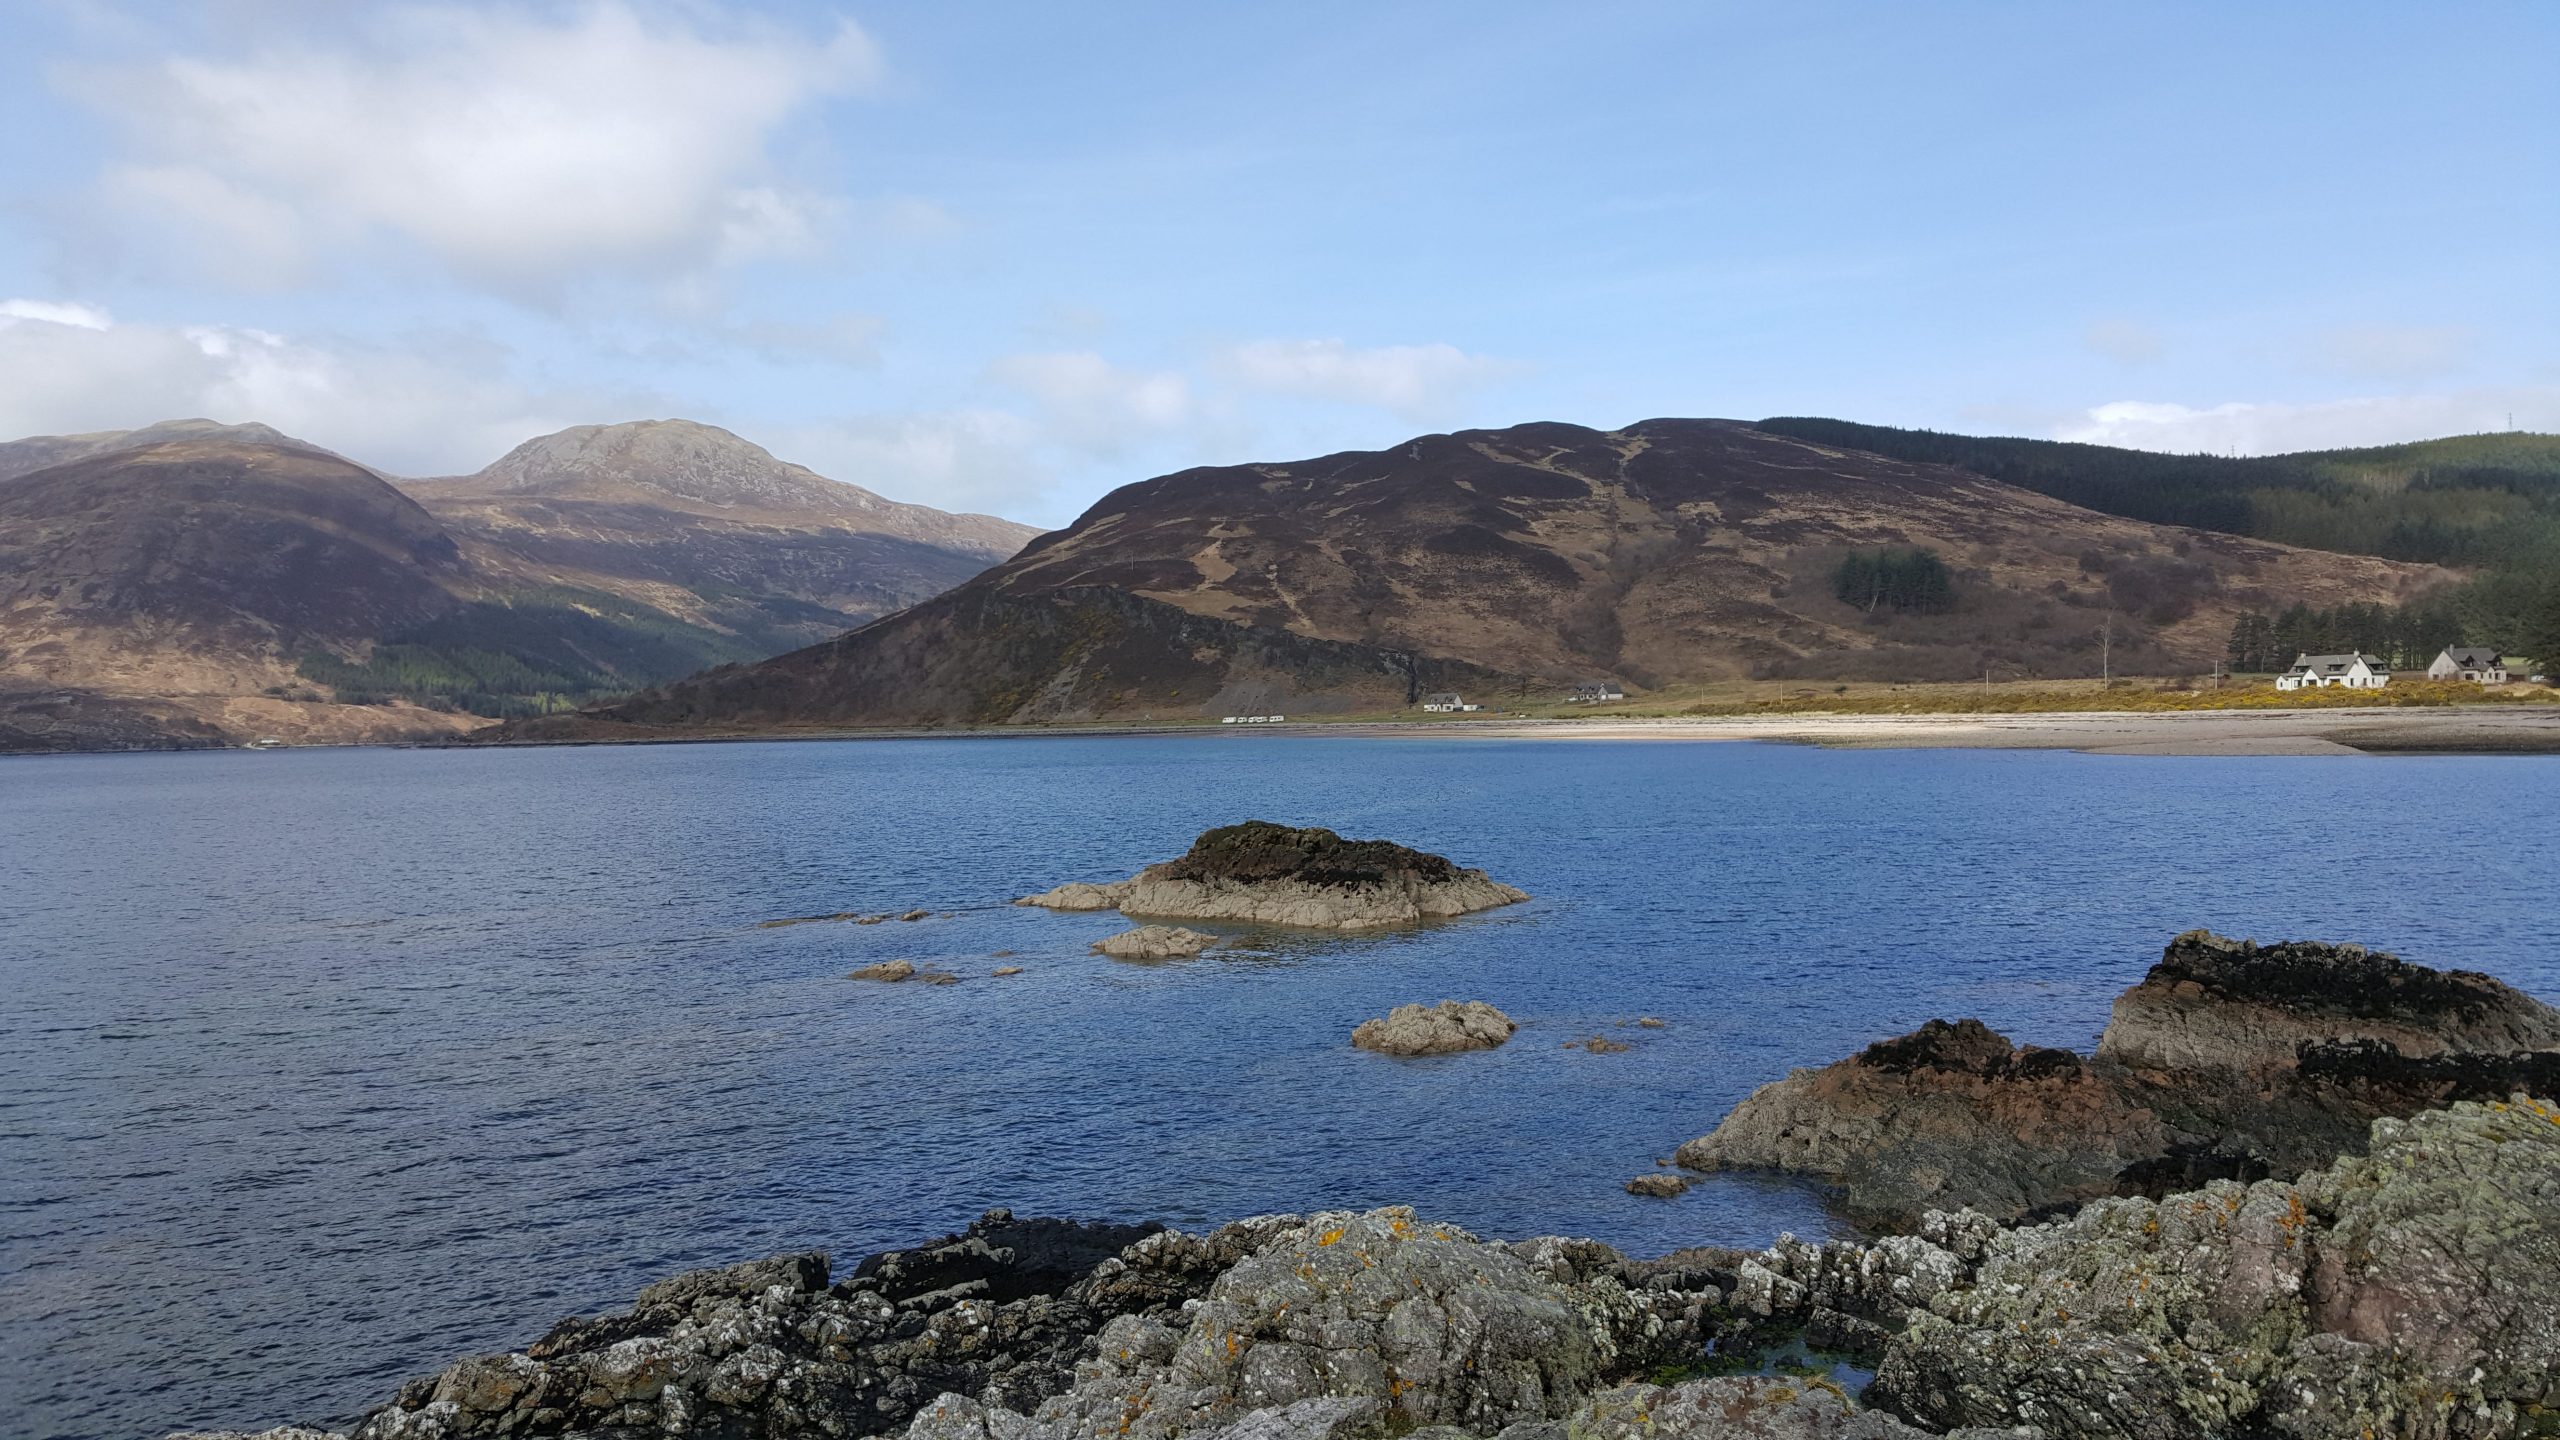 RELAX IN THE PEACE AND TRANQUILITY OF SEADRIFT BED AND BREAKFAST AND EXPLORE SOME OF THE MOST SPECTACULAR SCENERY IN SCOTLAND